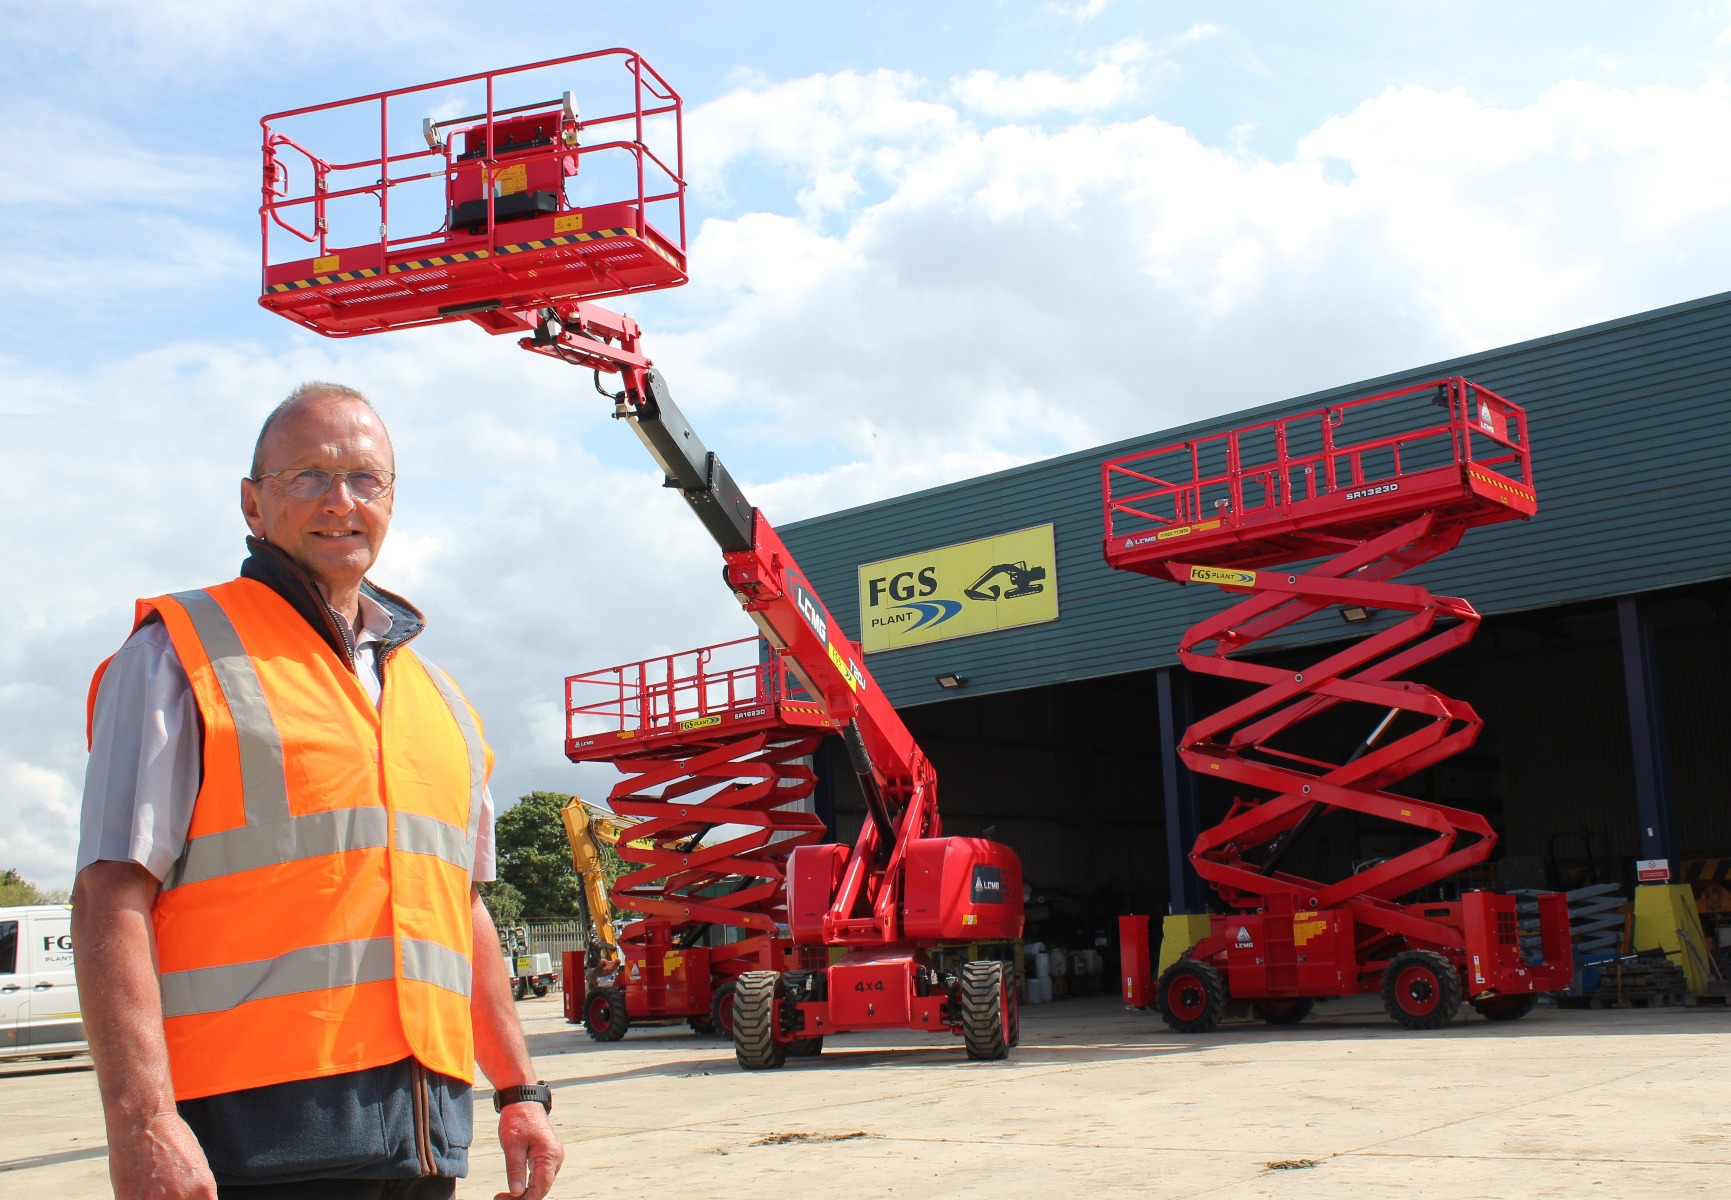 Dave Solomons, Director of Hire Access Platforms